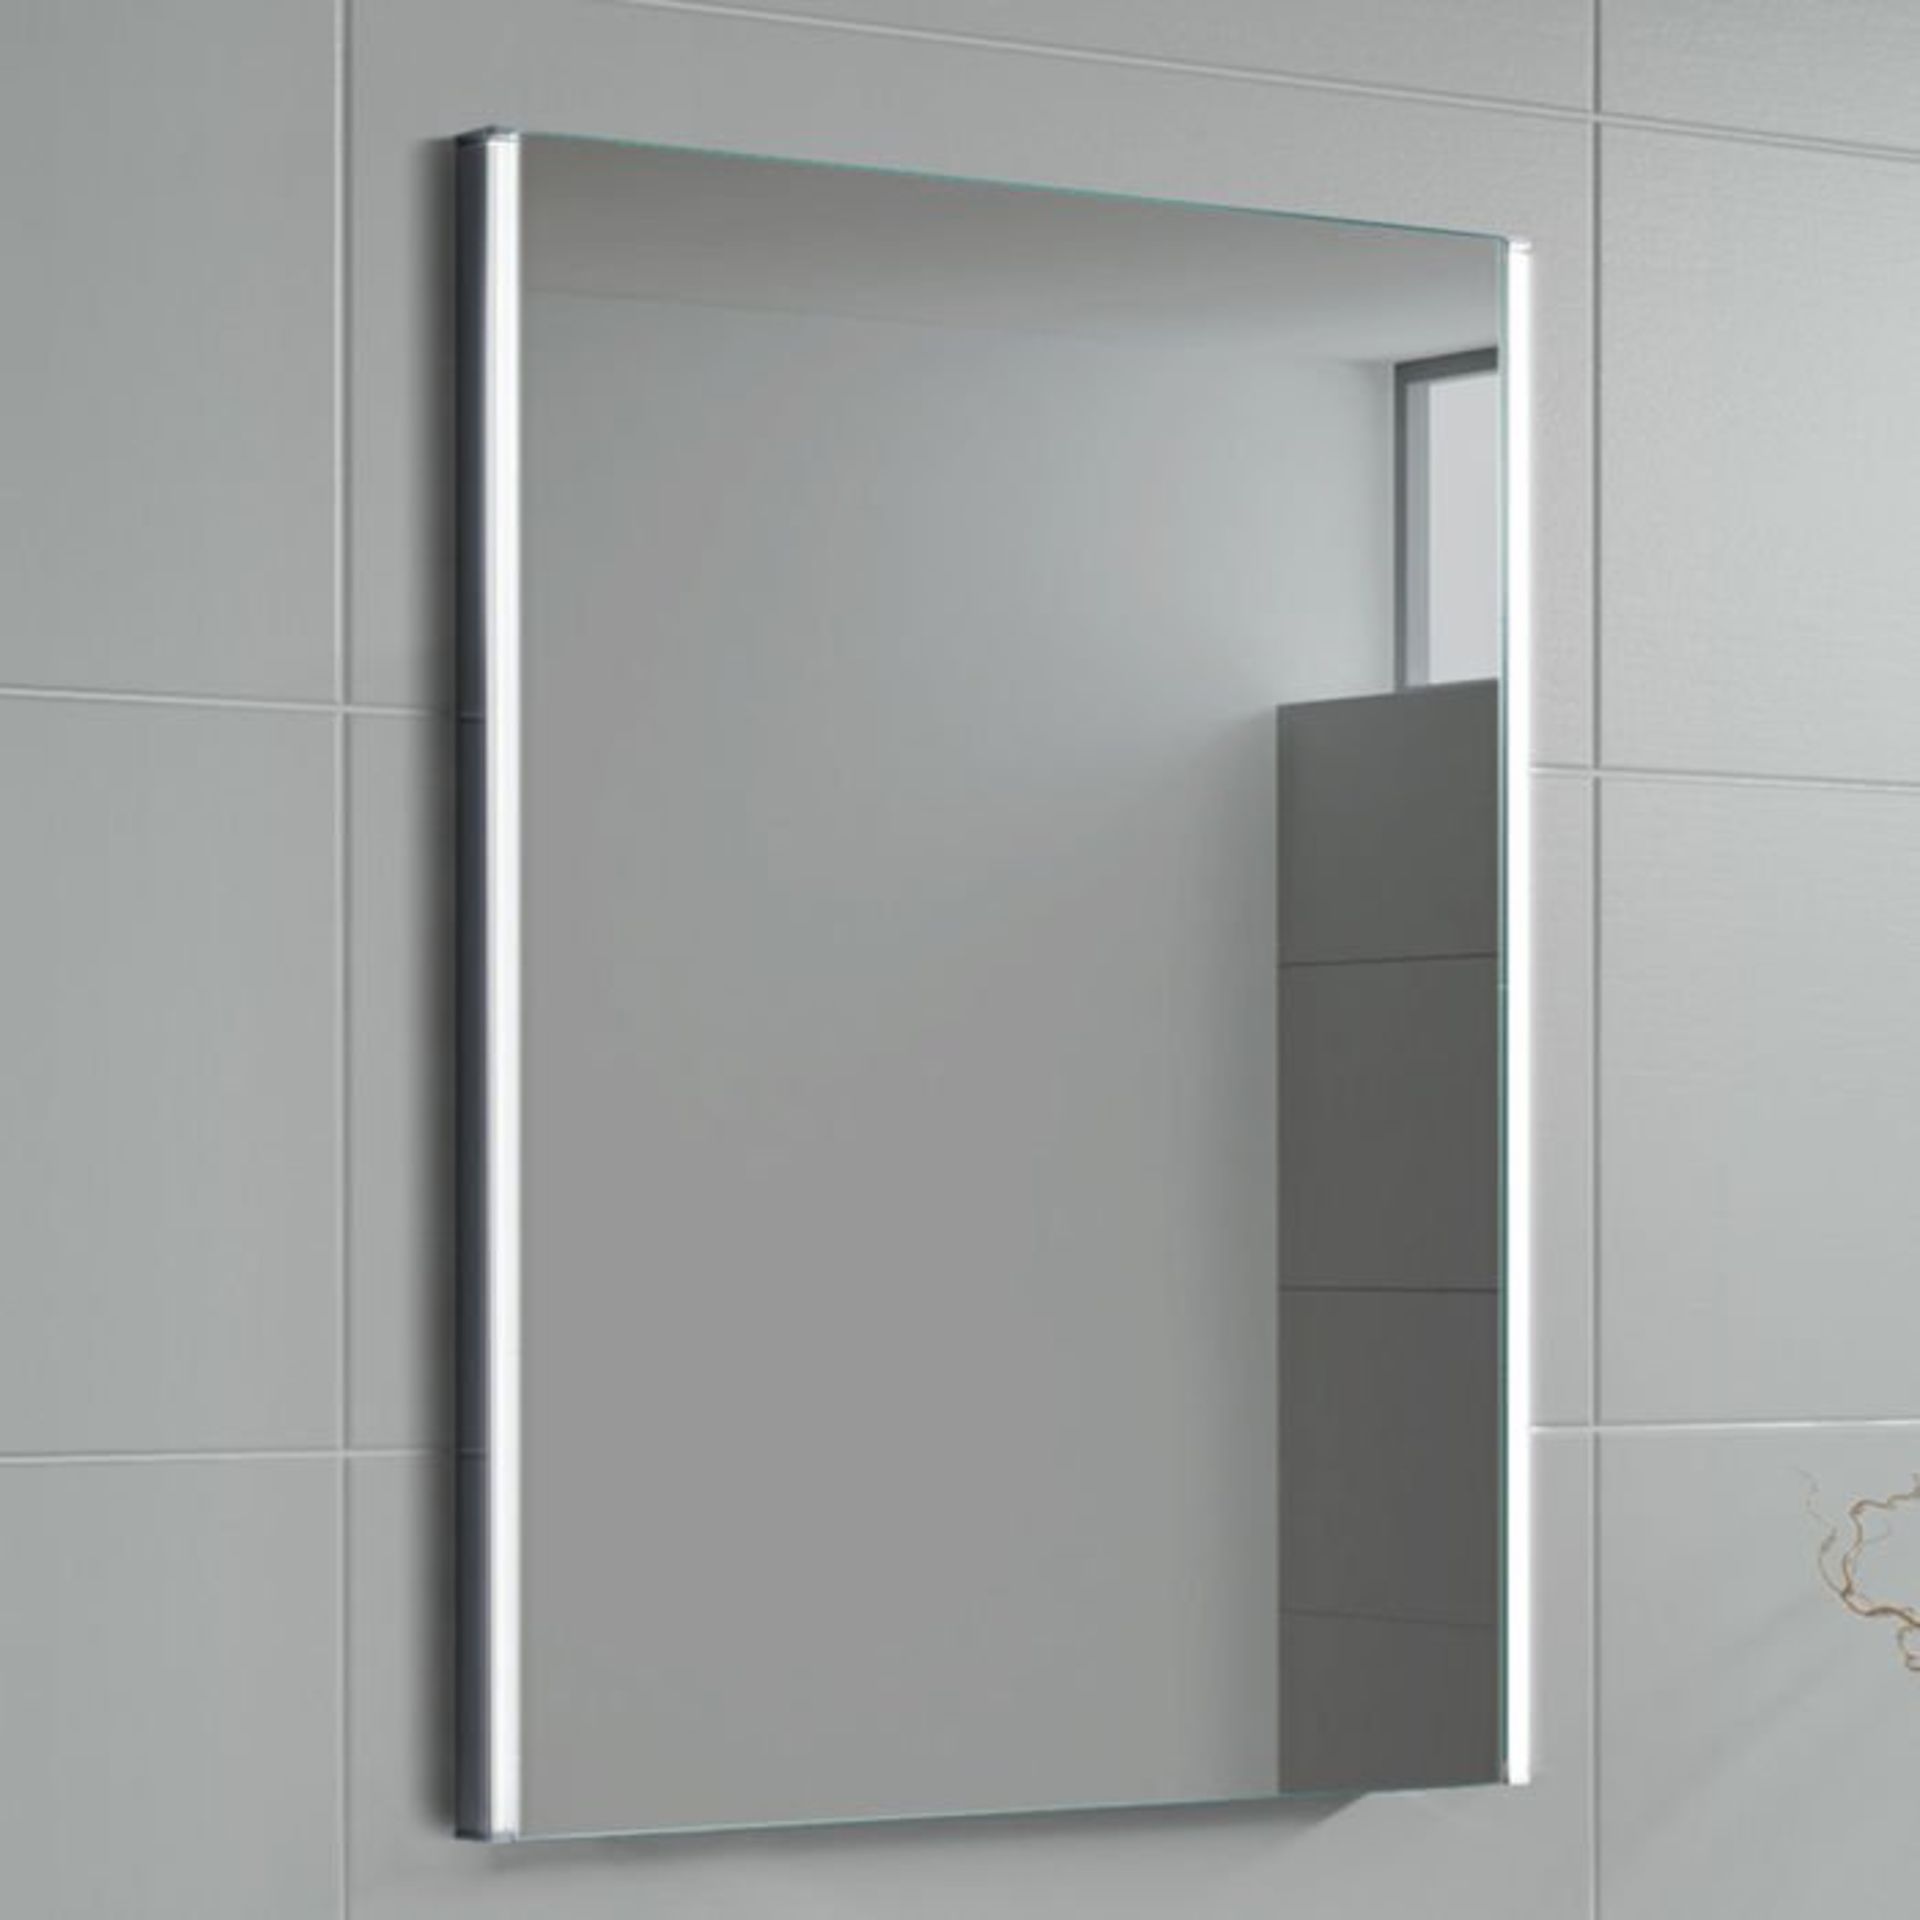 (H211) 700x500mm Lunar Illuminated LED Mirror. RRP £349.99. Energy efficient LED lighting with - Image 2 of 2